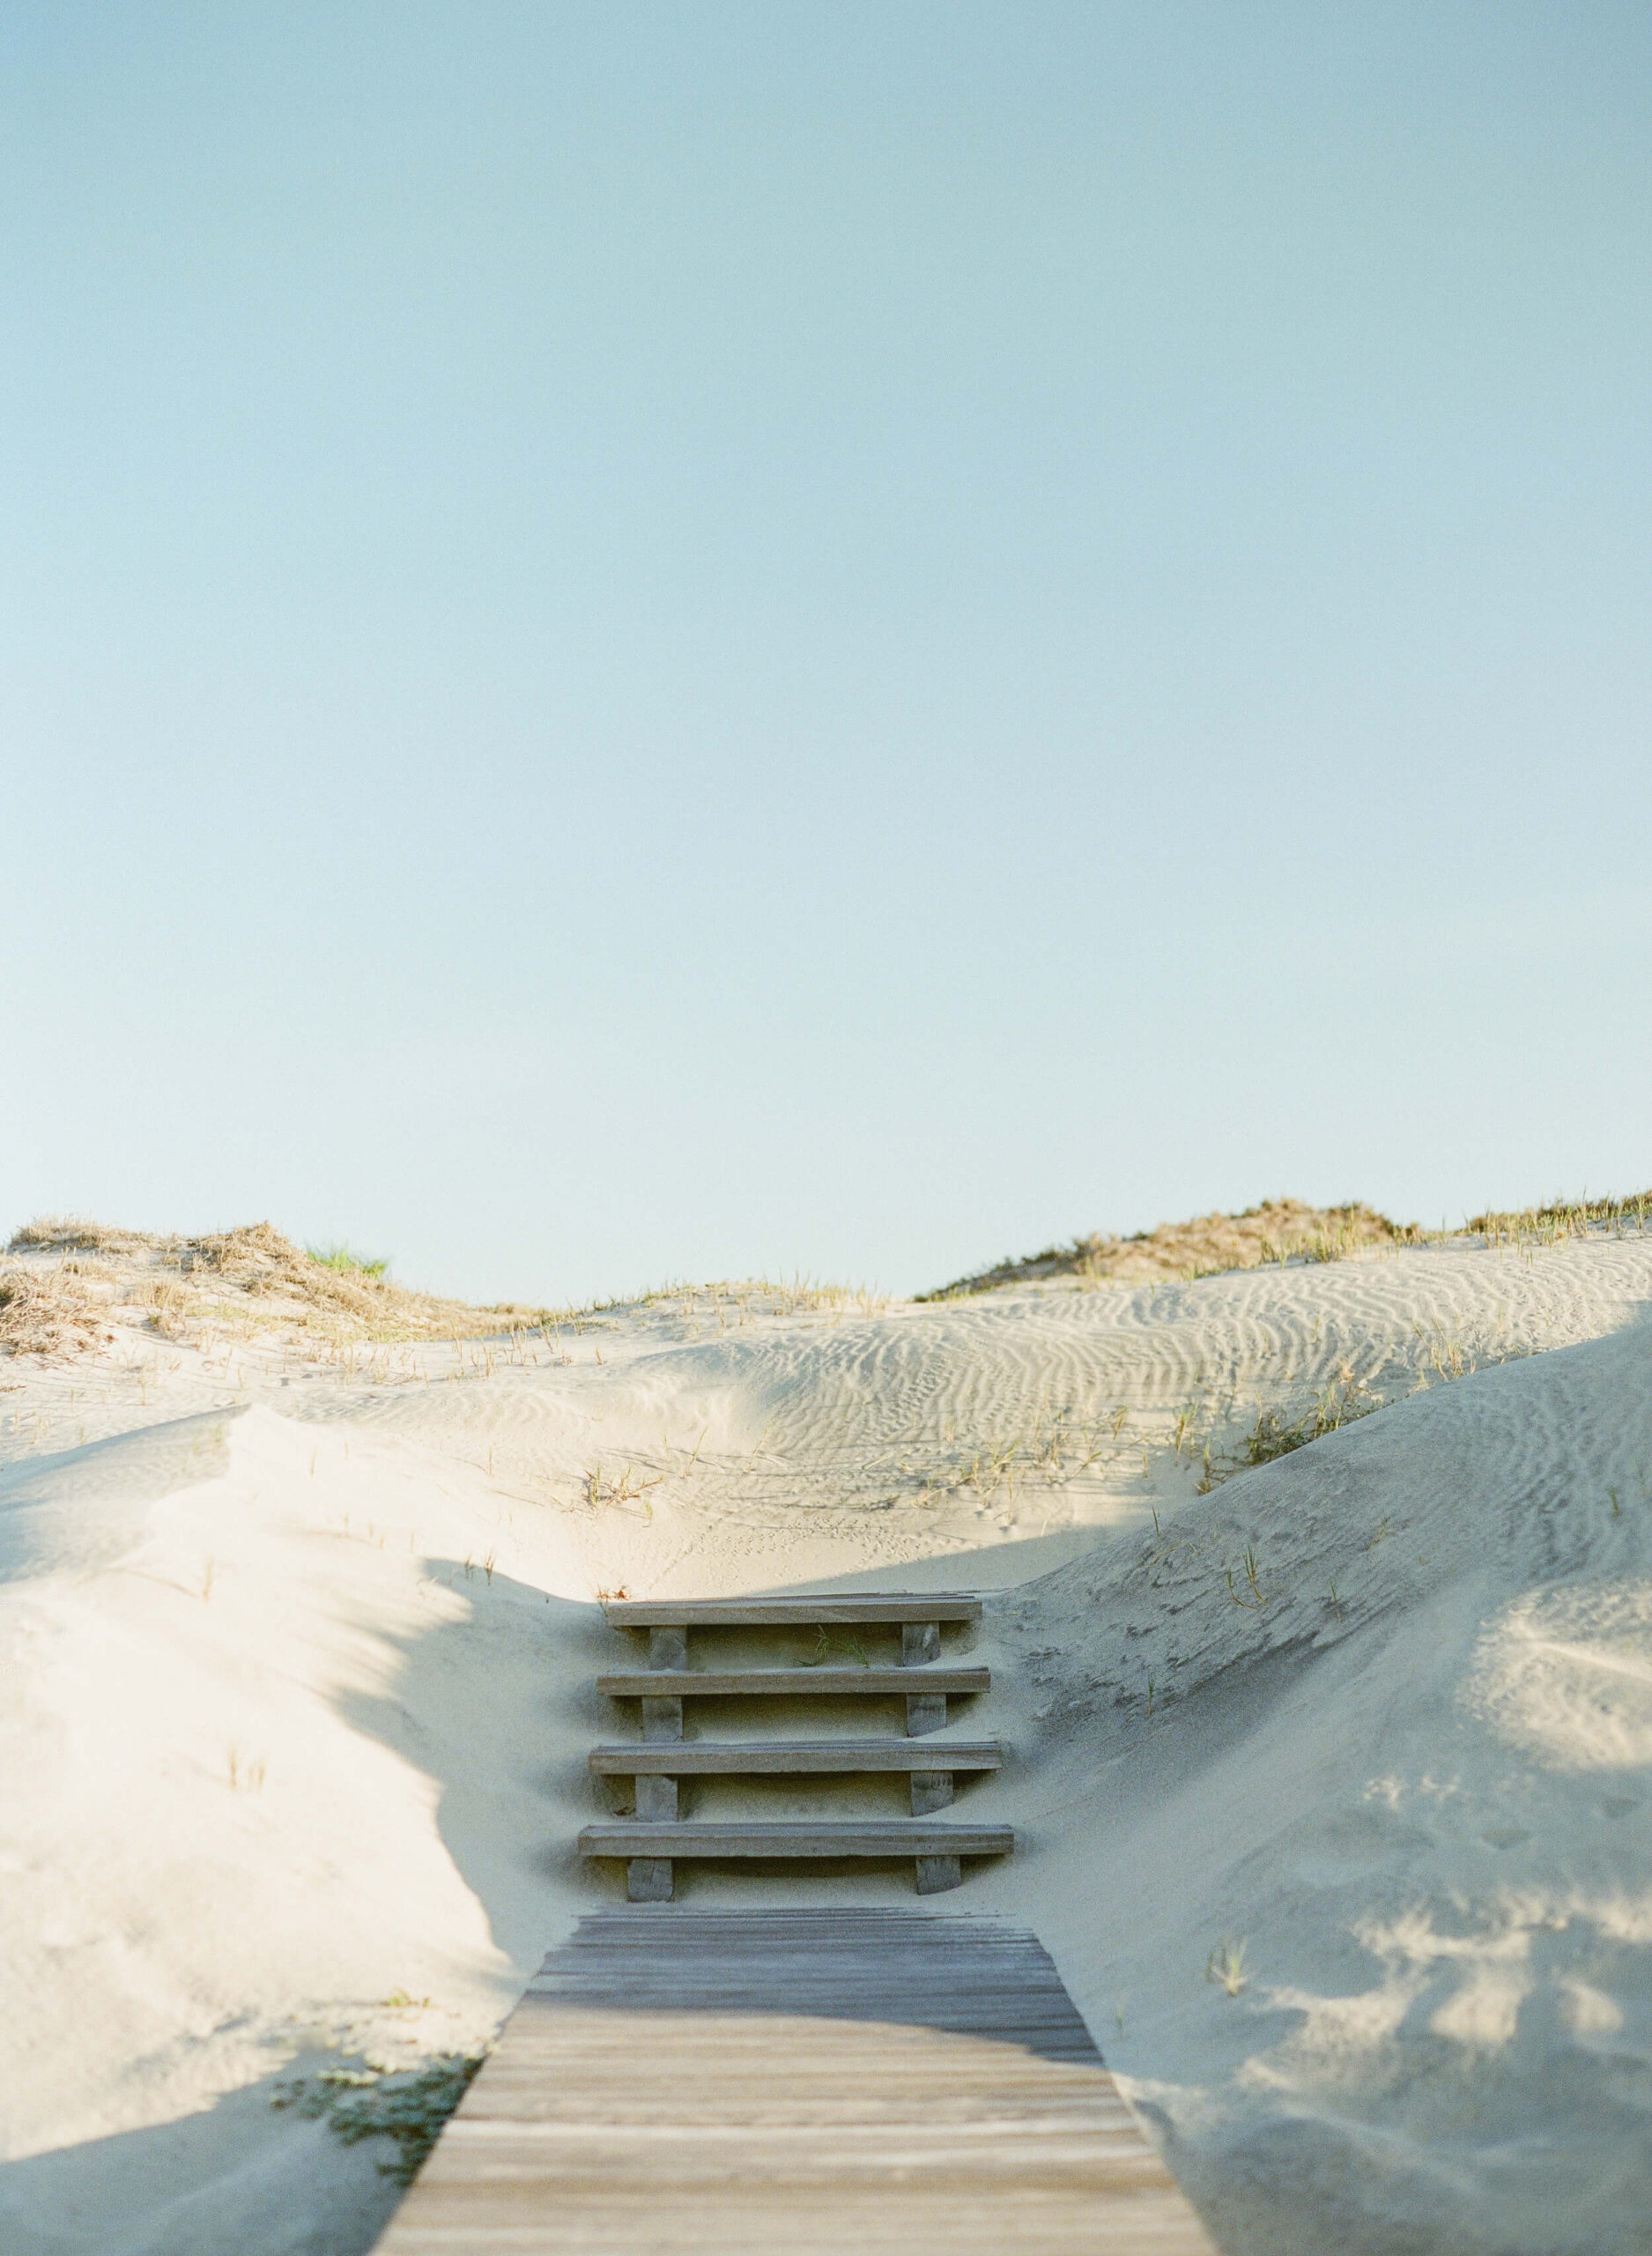 Wooden stairs in sand dunes